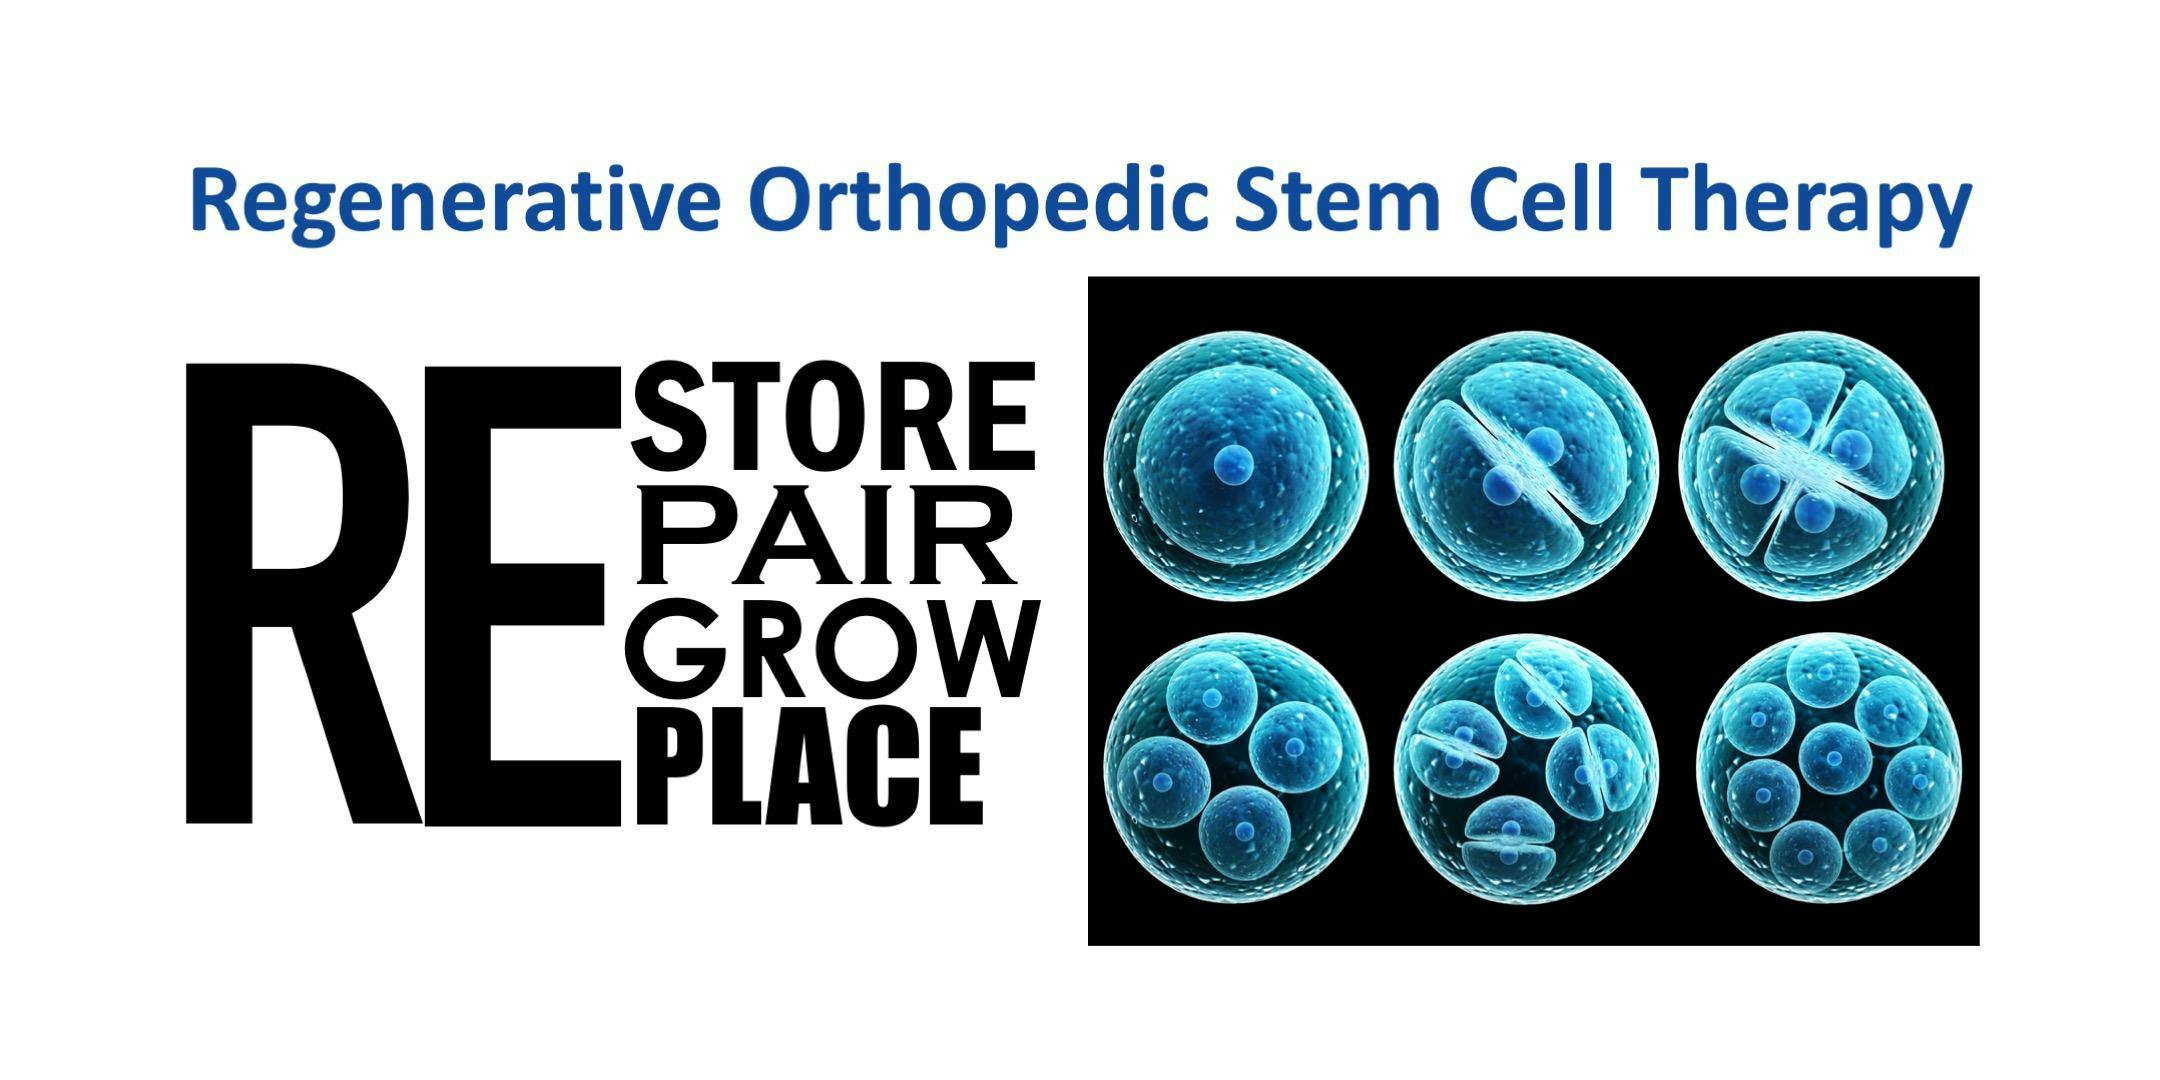 8/21/2018 FREE seminar: Regenerative Stem Cell Therapy for Joint Pain Relief